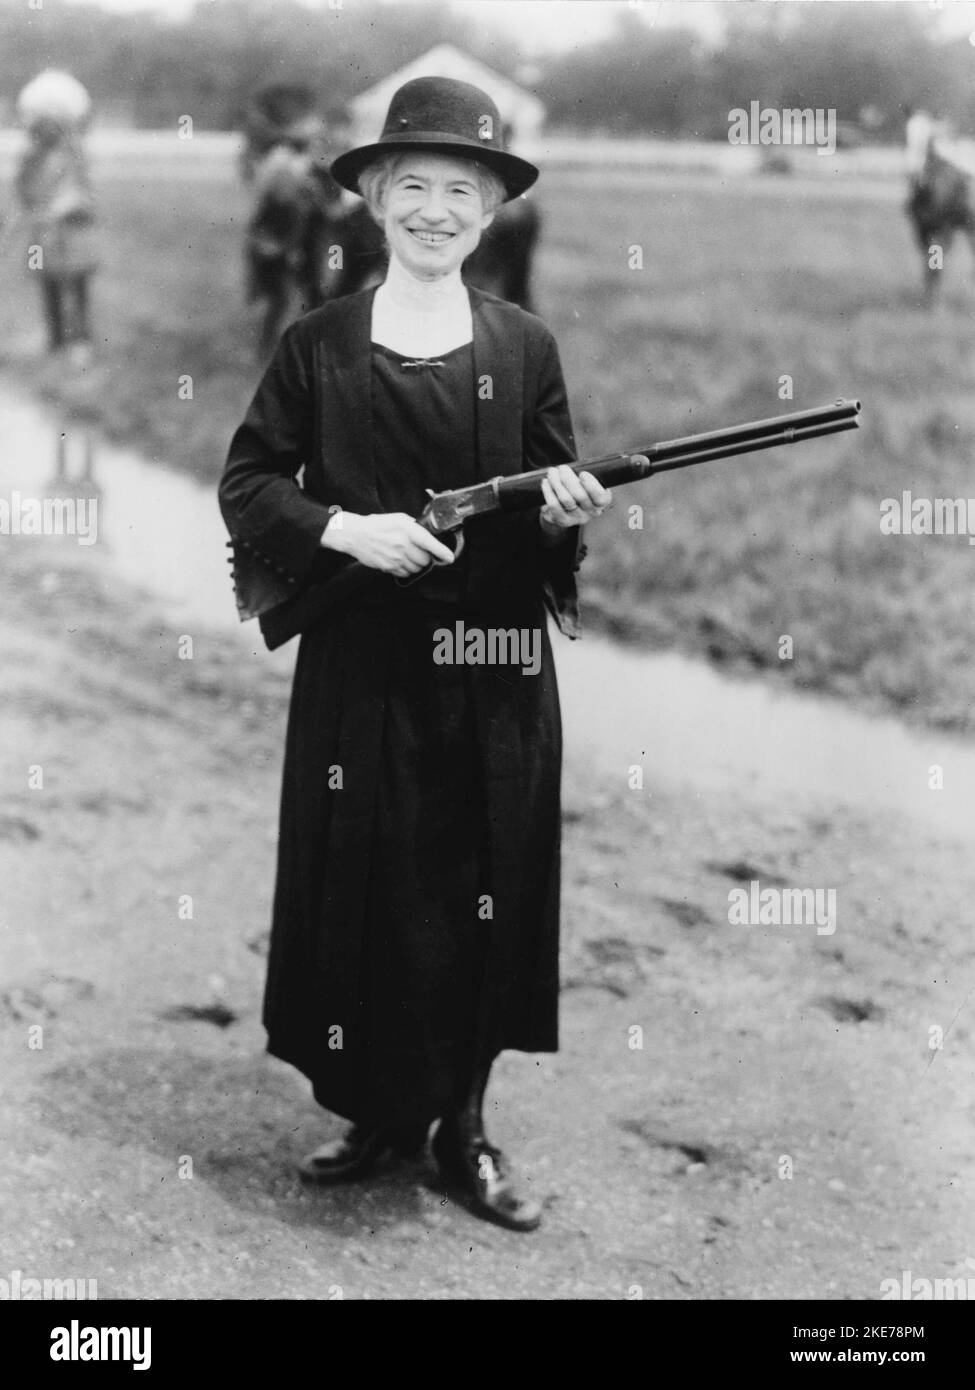 Annie Oakley, with a gun Buffalo Bill gave her 1922. Annie Oakley (Phoebe Ann Mosey, 1860 – 1926) American sharpshooter who starred in Buffalo Bill's Wild West show. Stock Photo